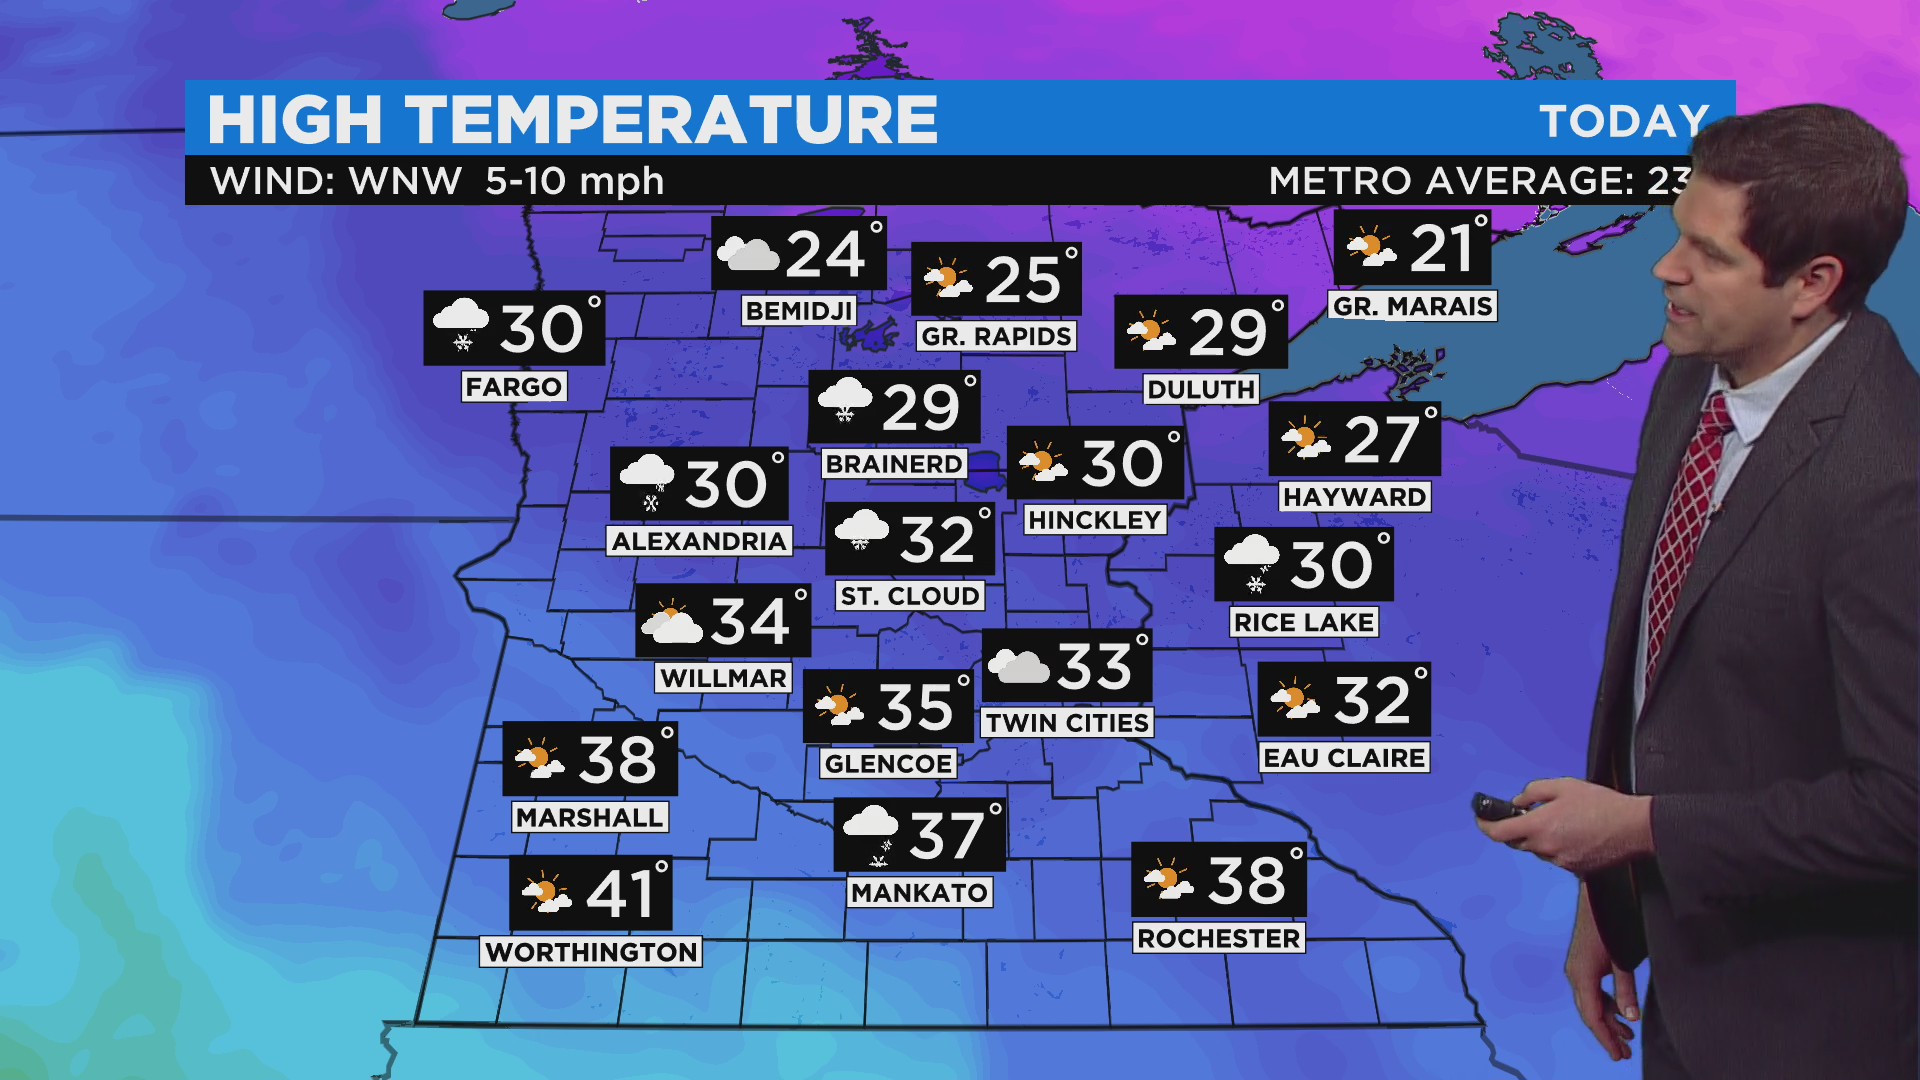 Minnesota Weather: Another Mild Day, With Early Precipitation Possible